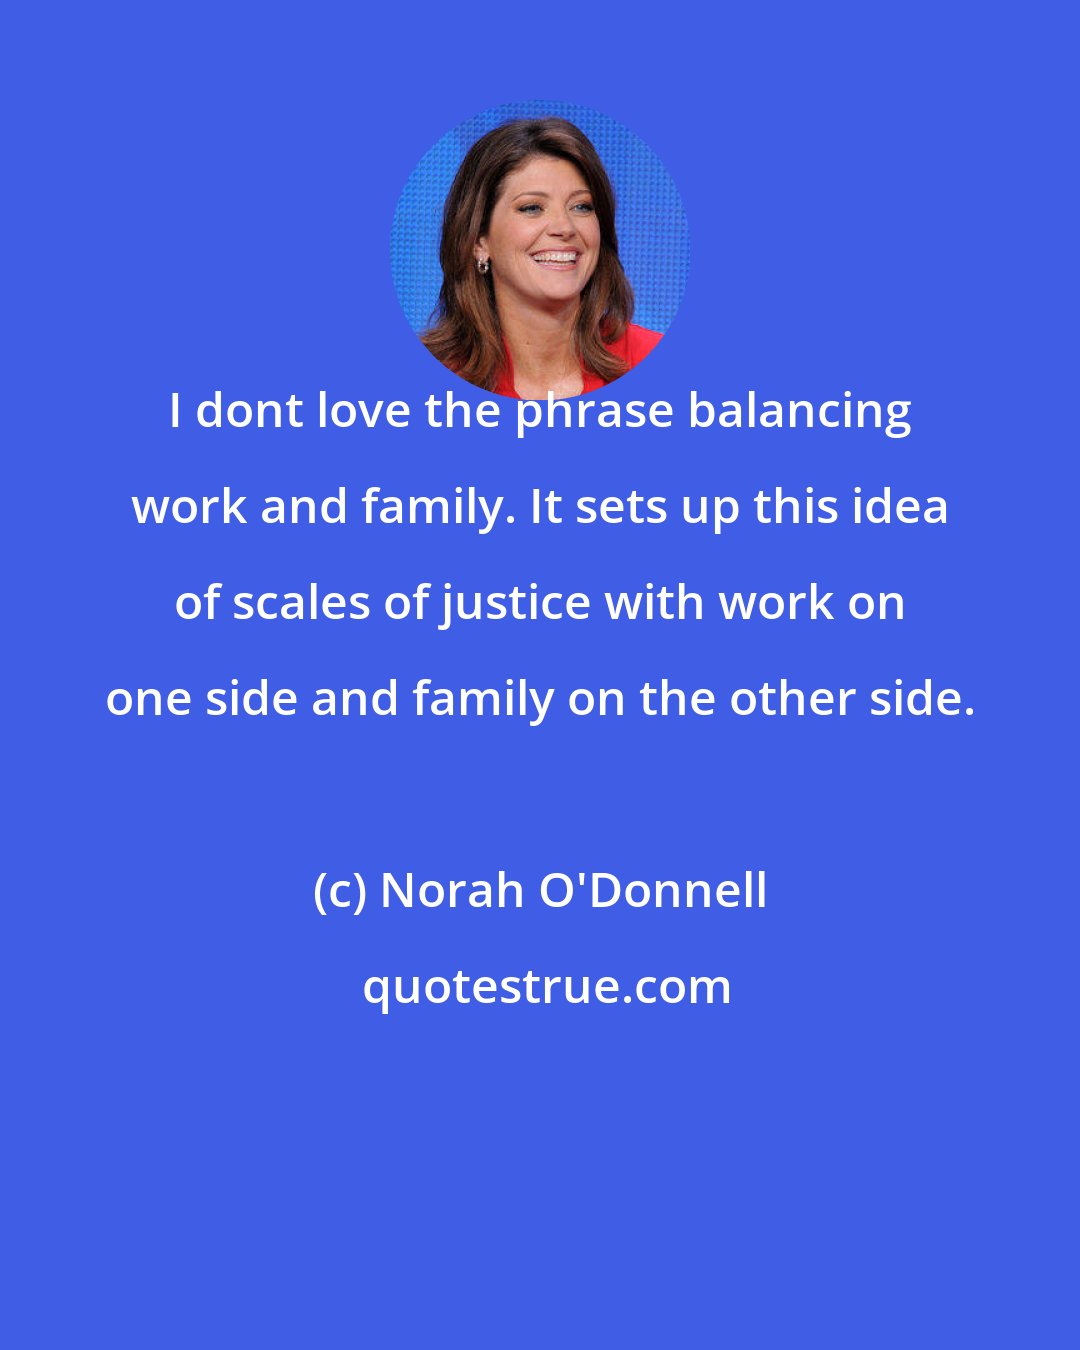 Norah O'Donnell: I dont love the phrase balancing work and family. It sets up this idea of scales of justice with work on one side and family on the other side.